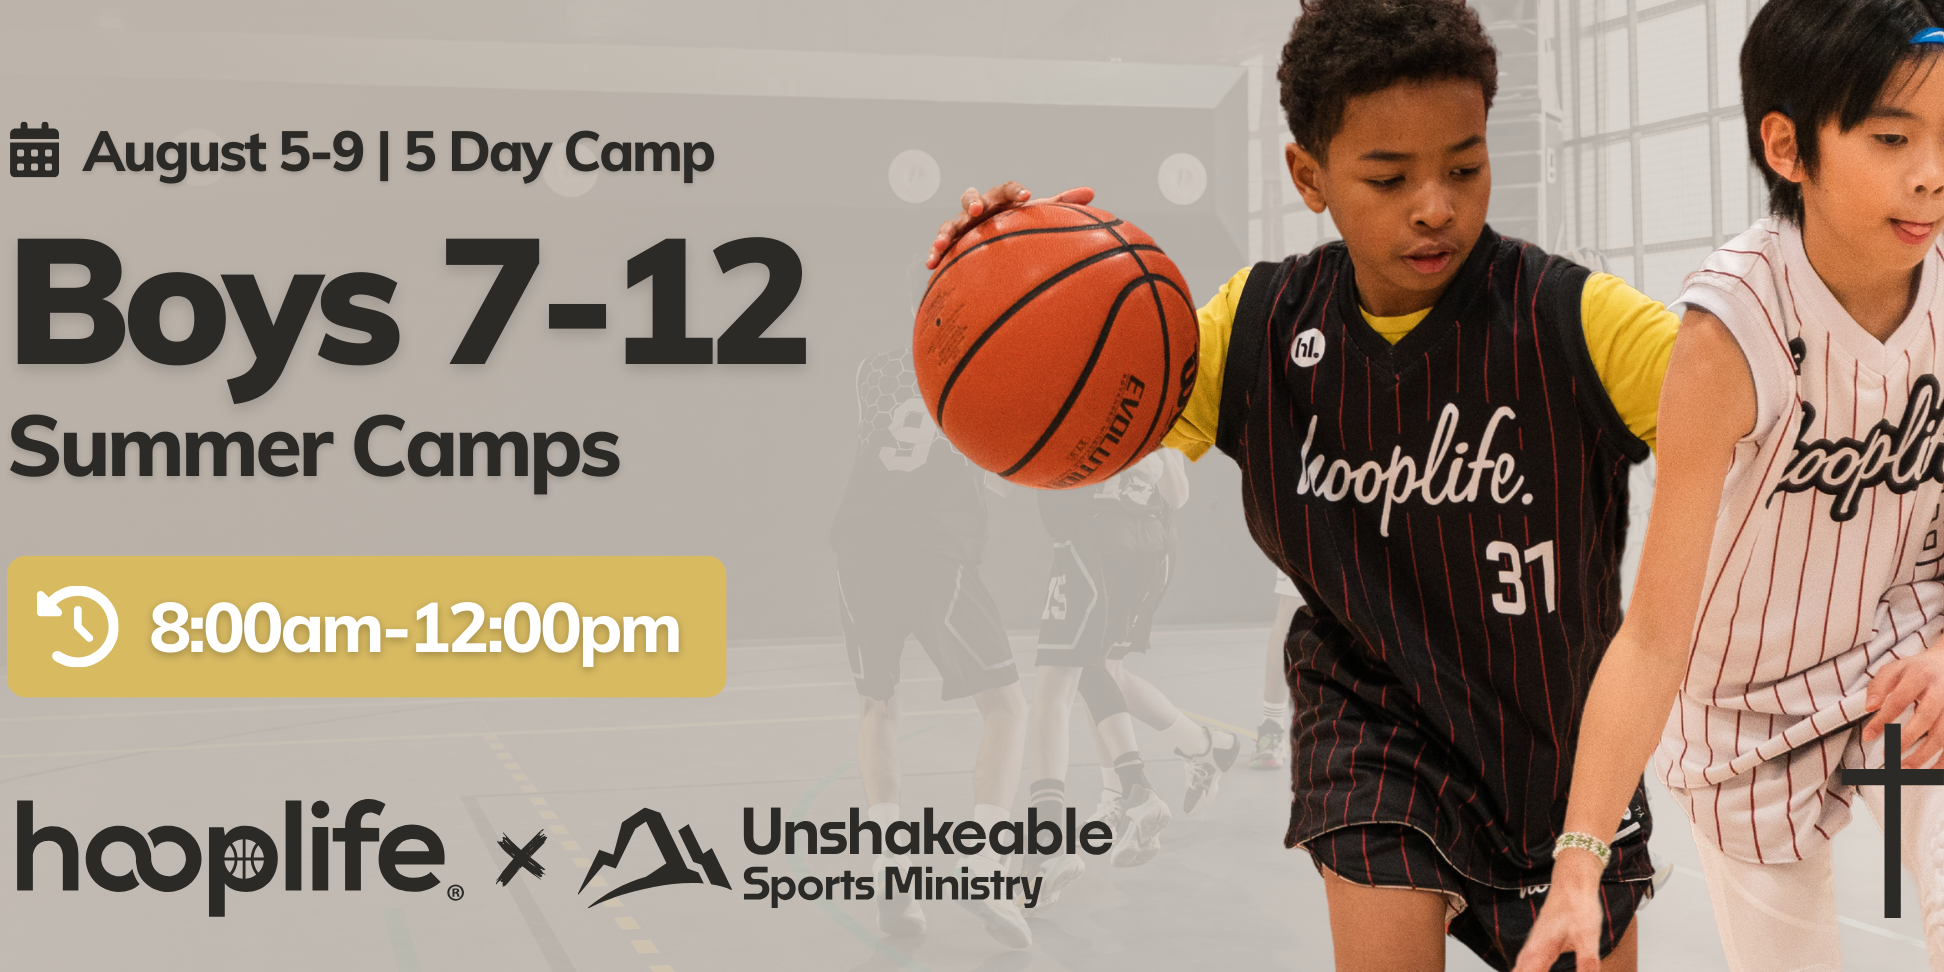 Unshakeable Sports Camp | Boys 7-12 | August 5-9